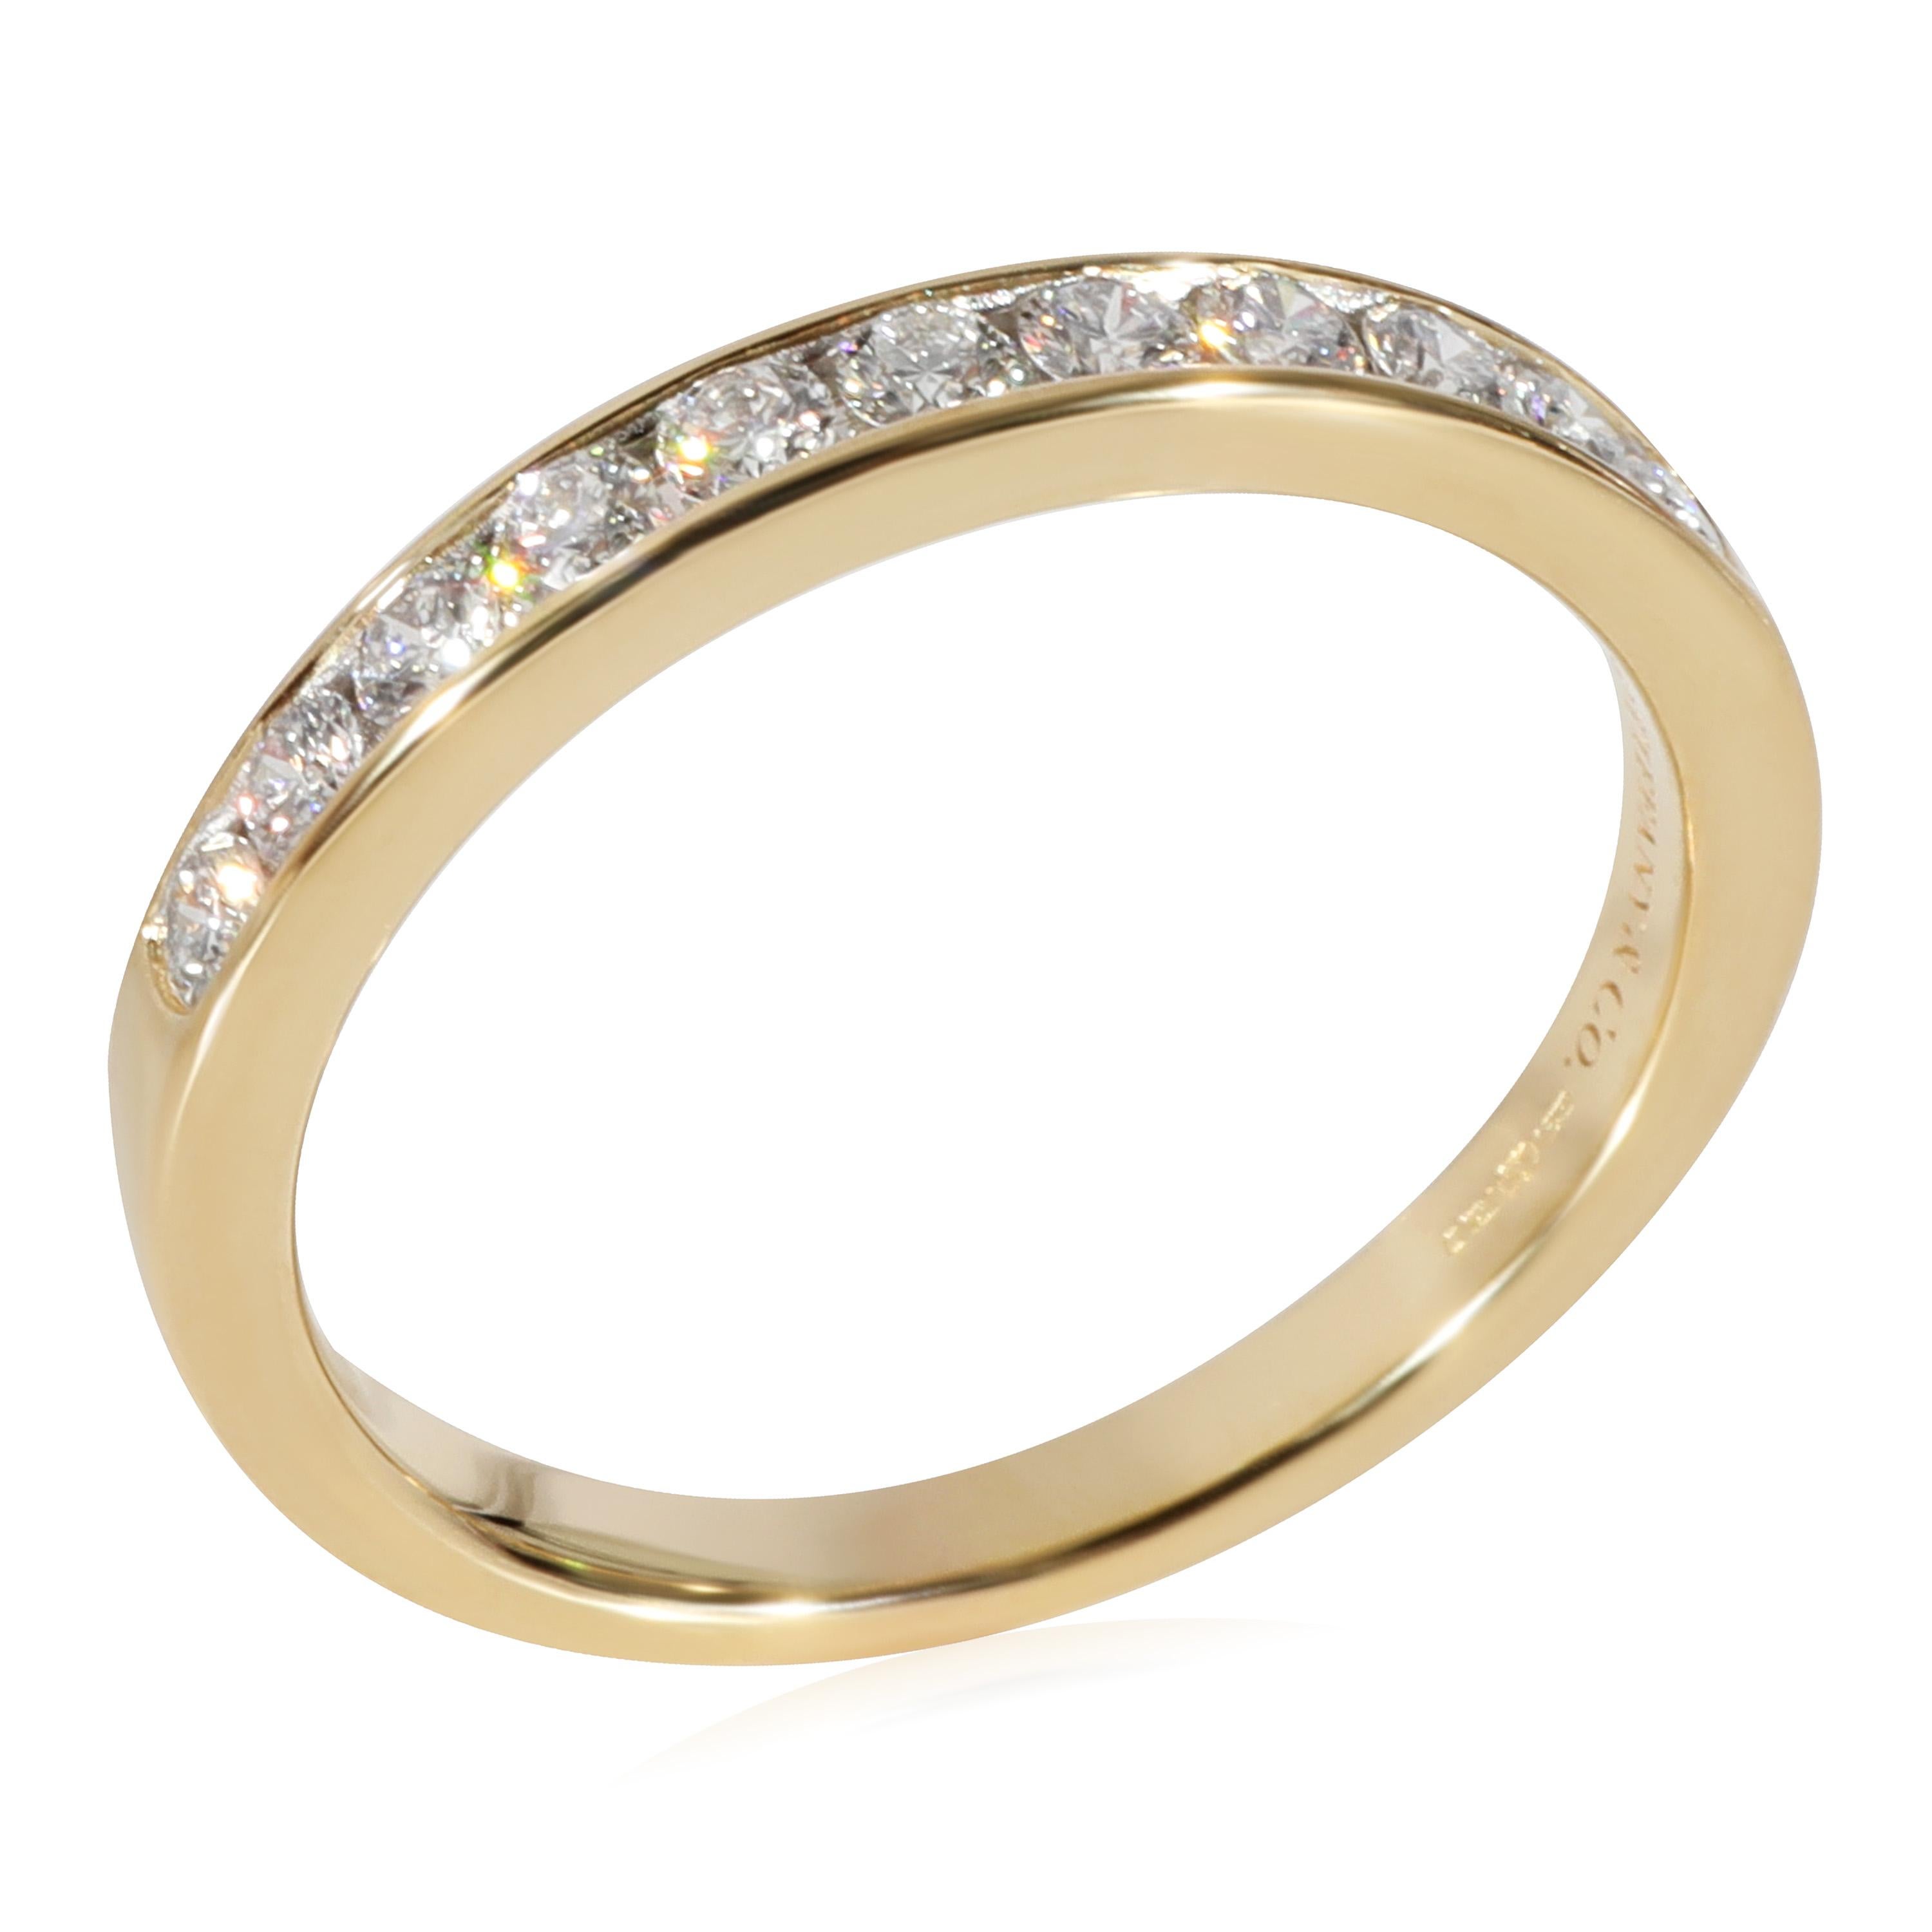 Tiffany & Co. Diamond Wedding Band in 18k Yellow Gold 0.39 CTW

PRIMARY DETAILS
SKU: 125809
Listing Title: Tiffany & Co. Diamond Wedding Band in 18k Yellow Gold 0.39 CTW
Condition Description: Retails for 3850 USD. In excellent condition and